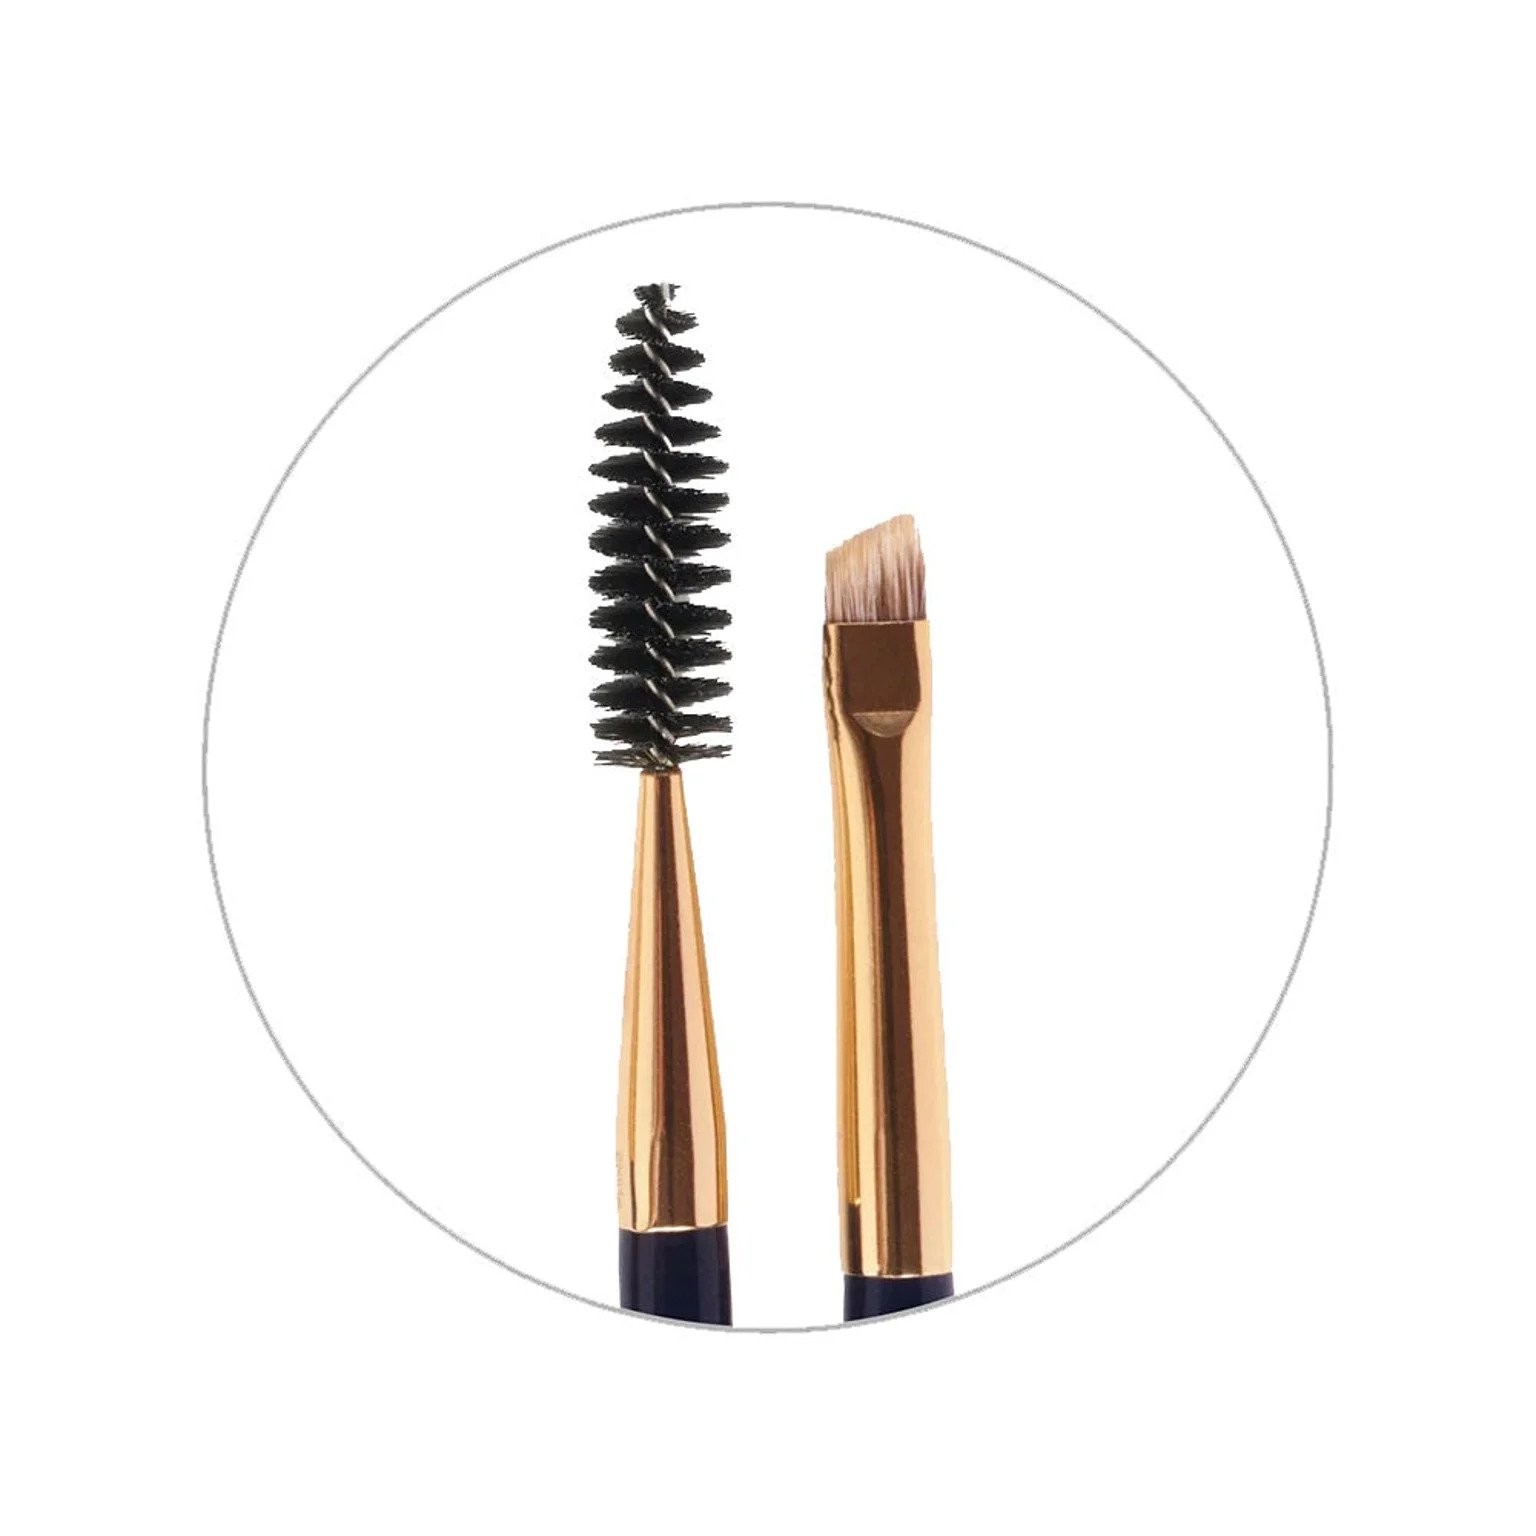 Lash and brow brush by Kimiko Essential